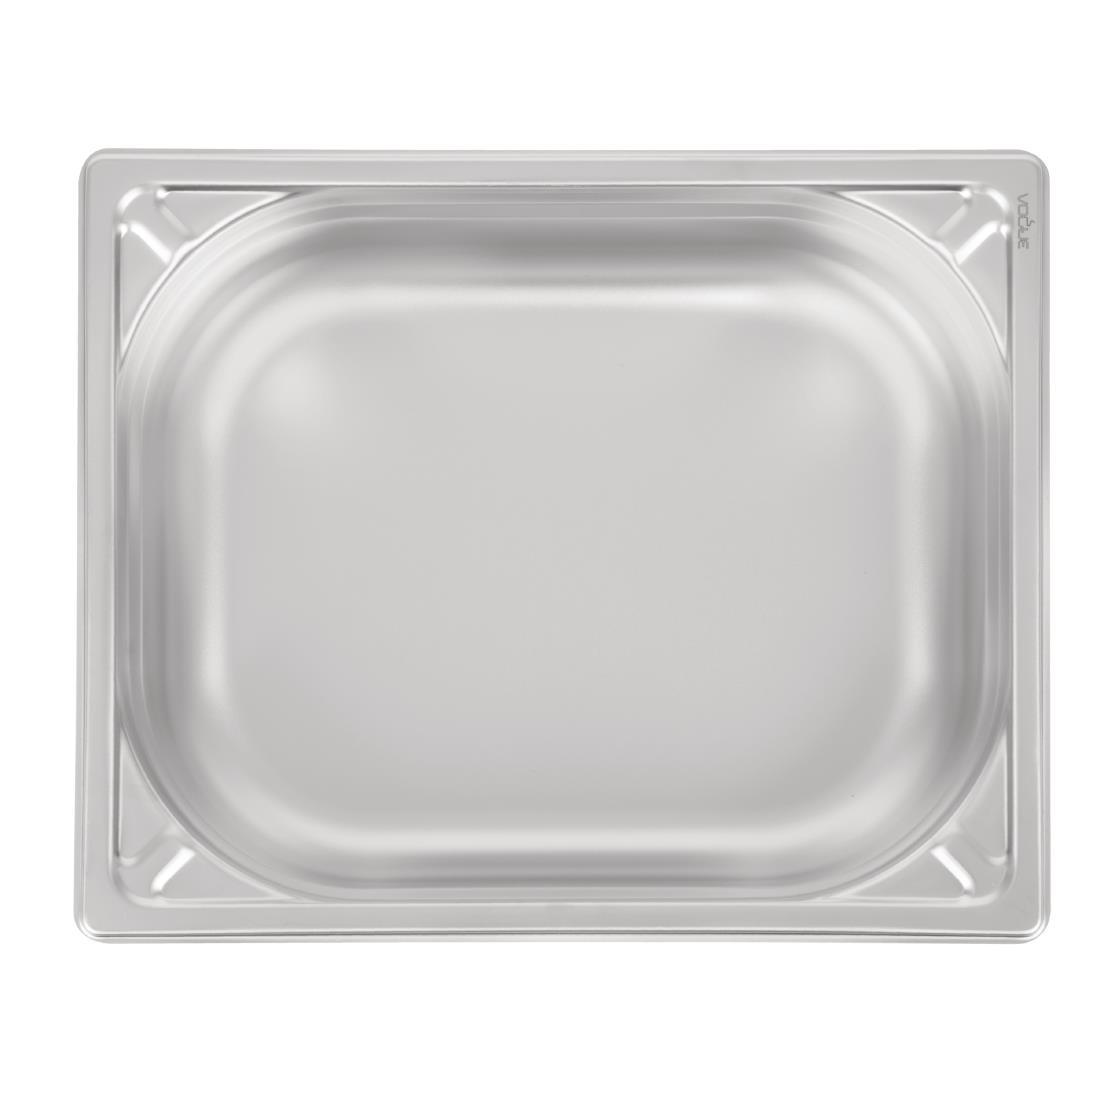 Vogue Heavy Duty Stainless Steel 1/2 Gastronorm Pan 100mm - DW439  - 4